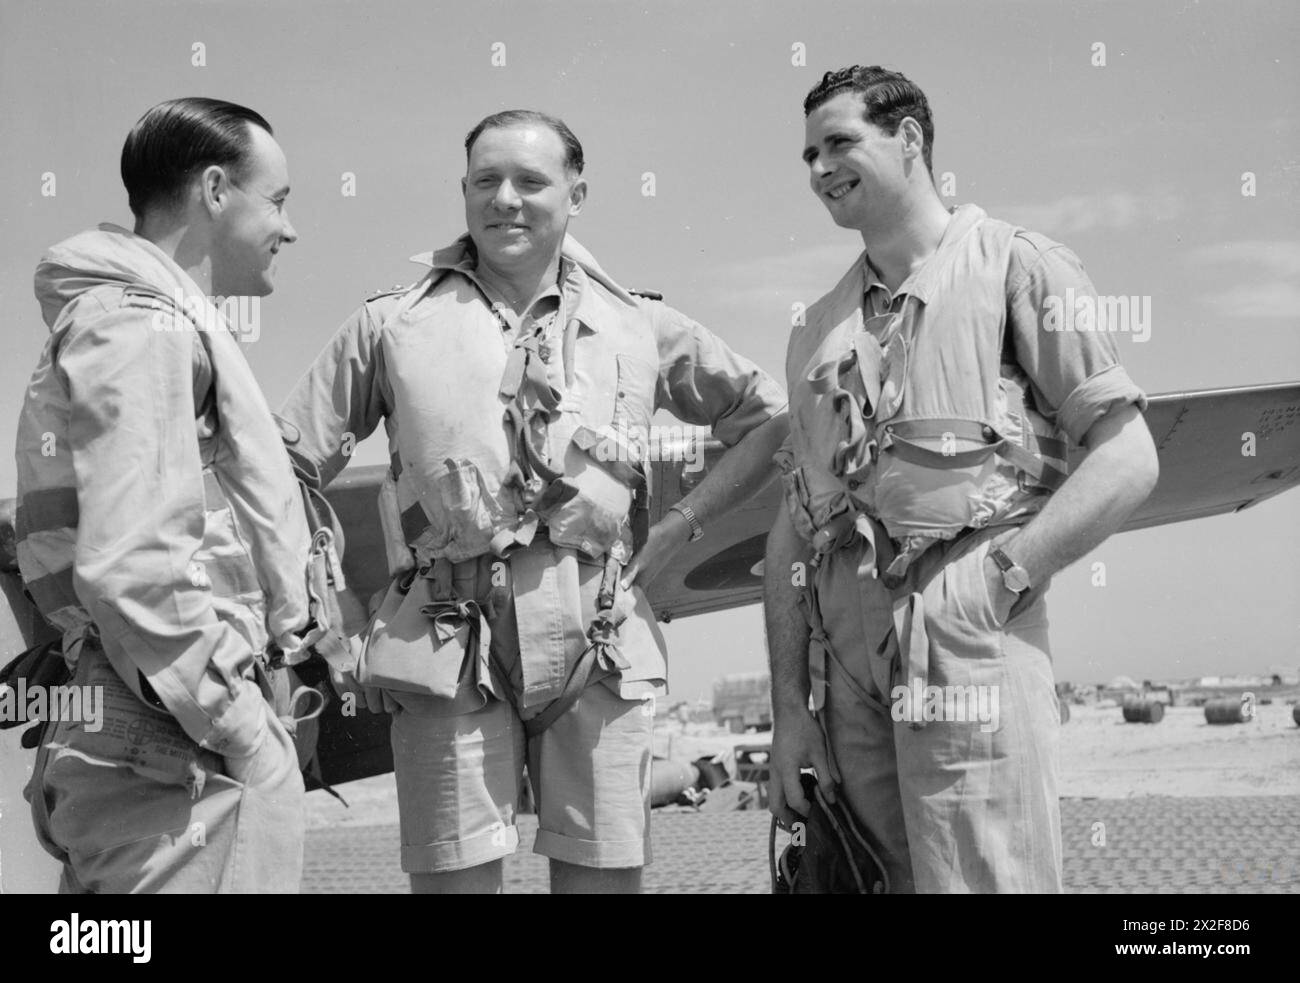 ROYAL AIR FORCE: ITALY, THE BALKANS AND SOUTH-EAST EUROPE, 1944-1945. - Colonel L A Wilmot SAAF, Commanding Officer of No. 239 Wing RAF (centre), standing with two of his pilots at Cutella, south of Vasto, Italy, the day after leading the Wing on a highly successful strike to the Pescara River dam, which they destroyed with 500-lb bombs, and from which all aircraft returned safely. Standing with Colonel Wilmot are the pilots whose bombs first breached the dam walls; Flight Lieutenant K Richards of No. 3 Squadron RAAF (left), and Flight Sergeant A Duguid of No. 260 Squadron RAF (right) Royal Ai Stock Photo